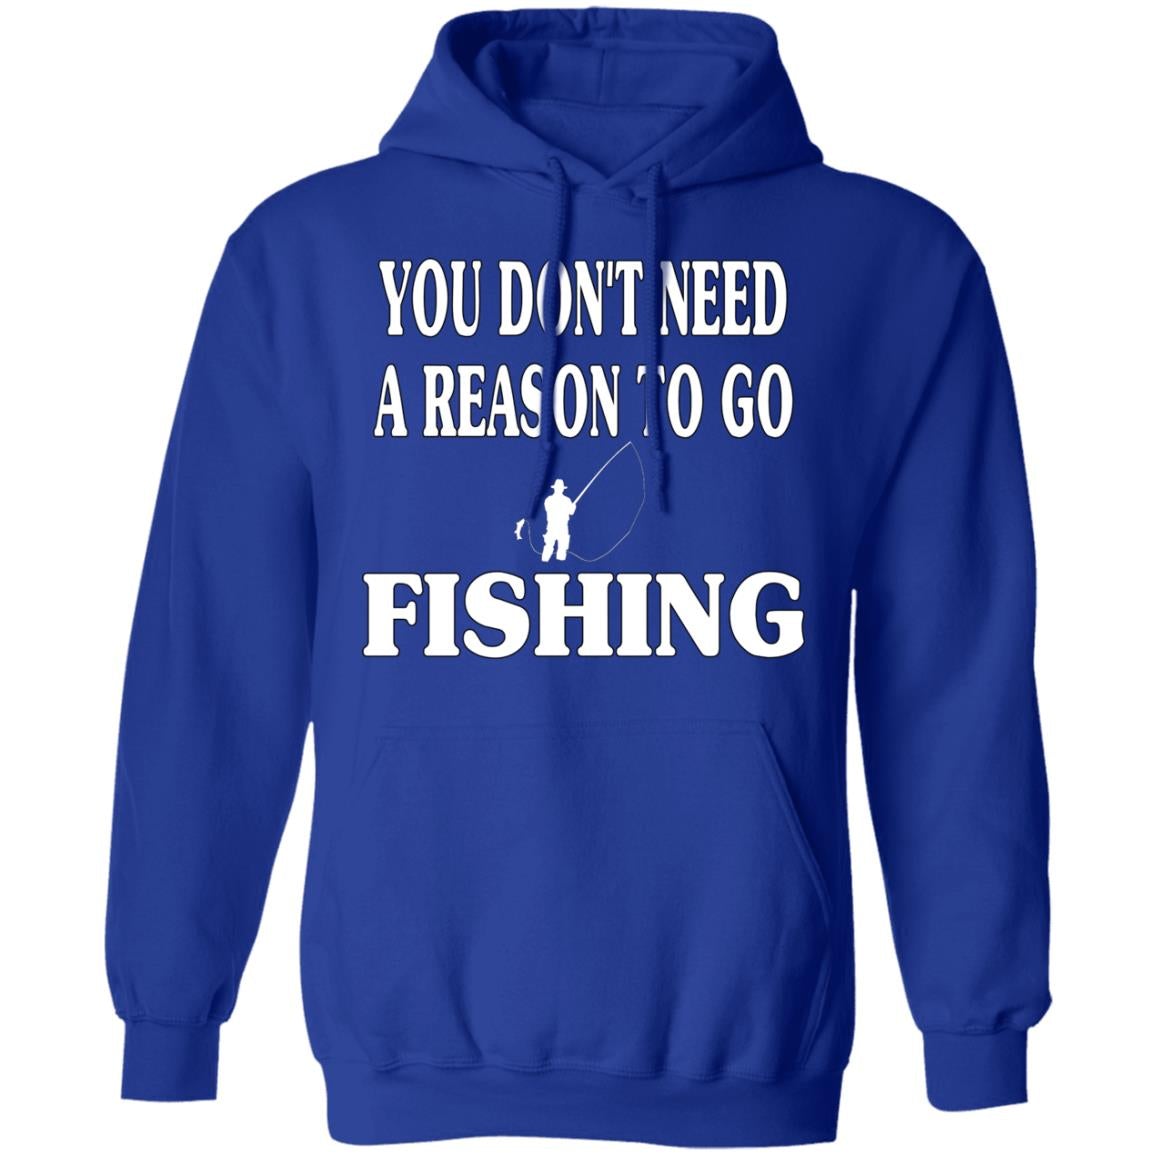 You don't need a reason to go fishing hoodie royal